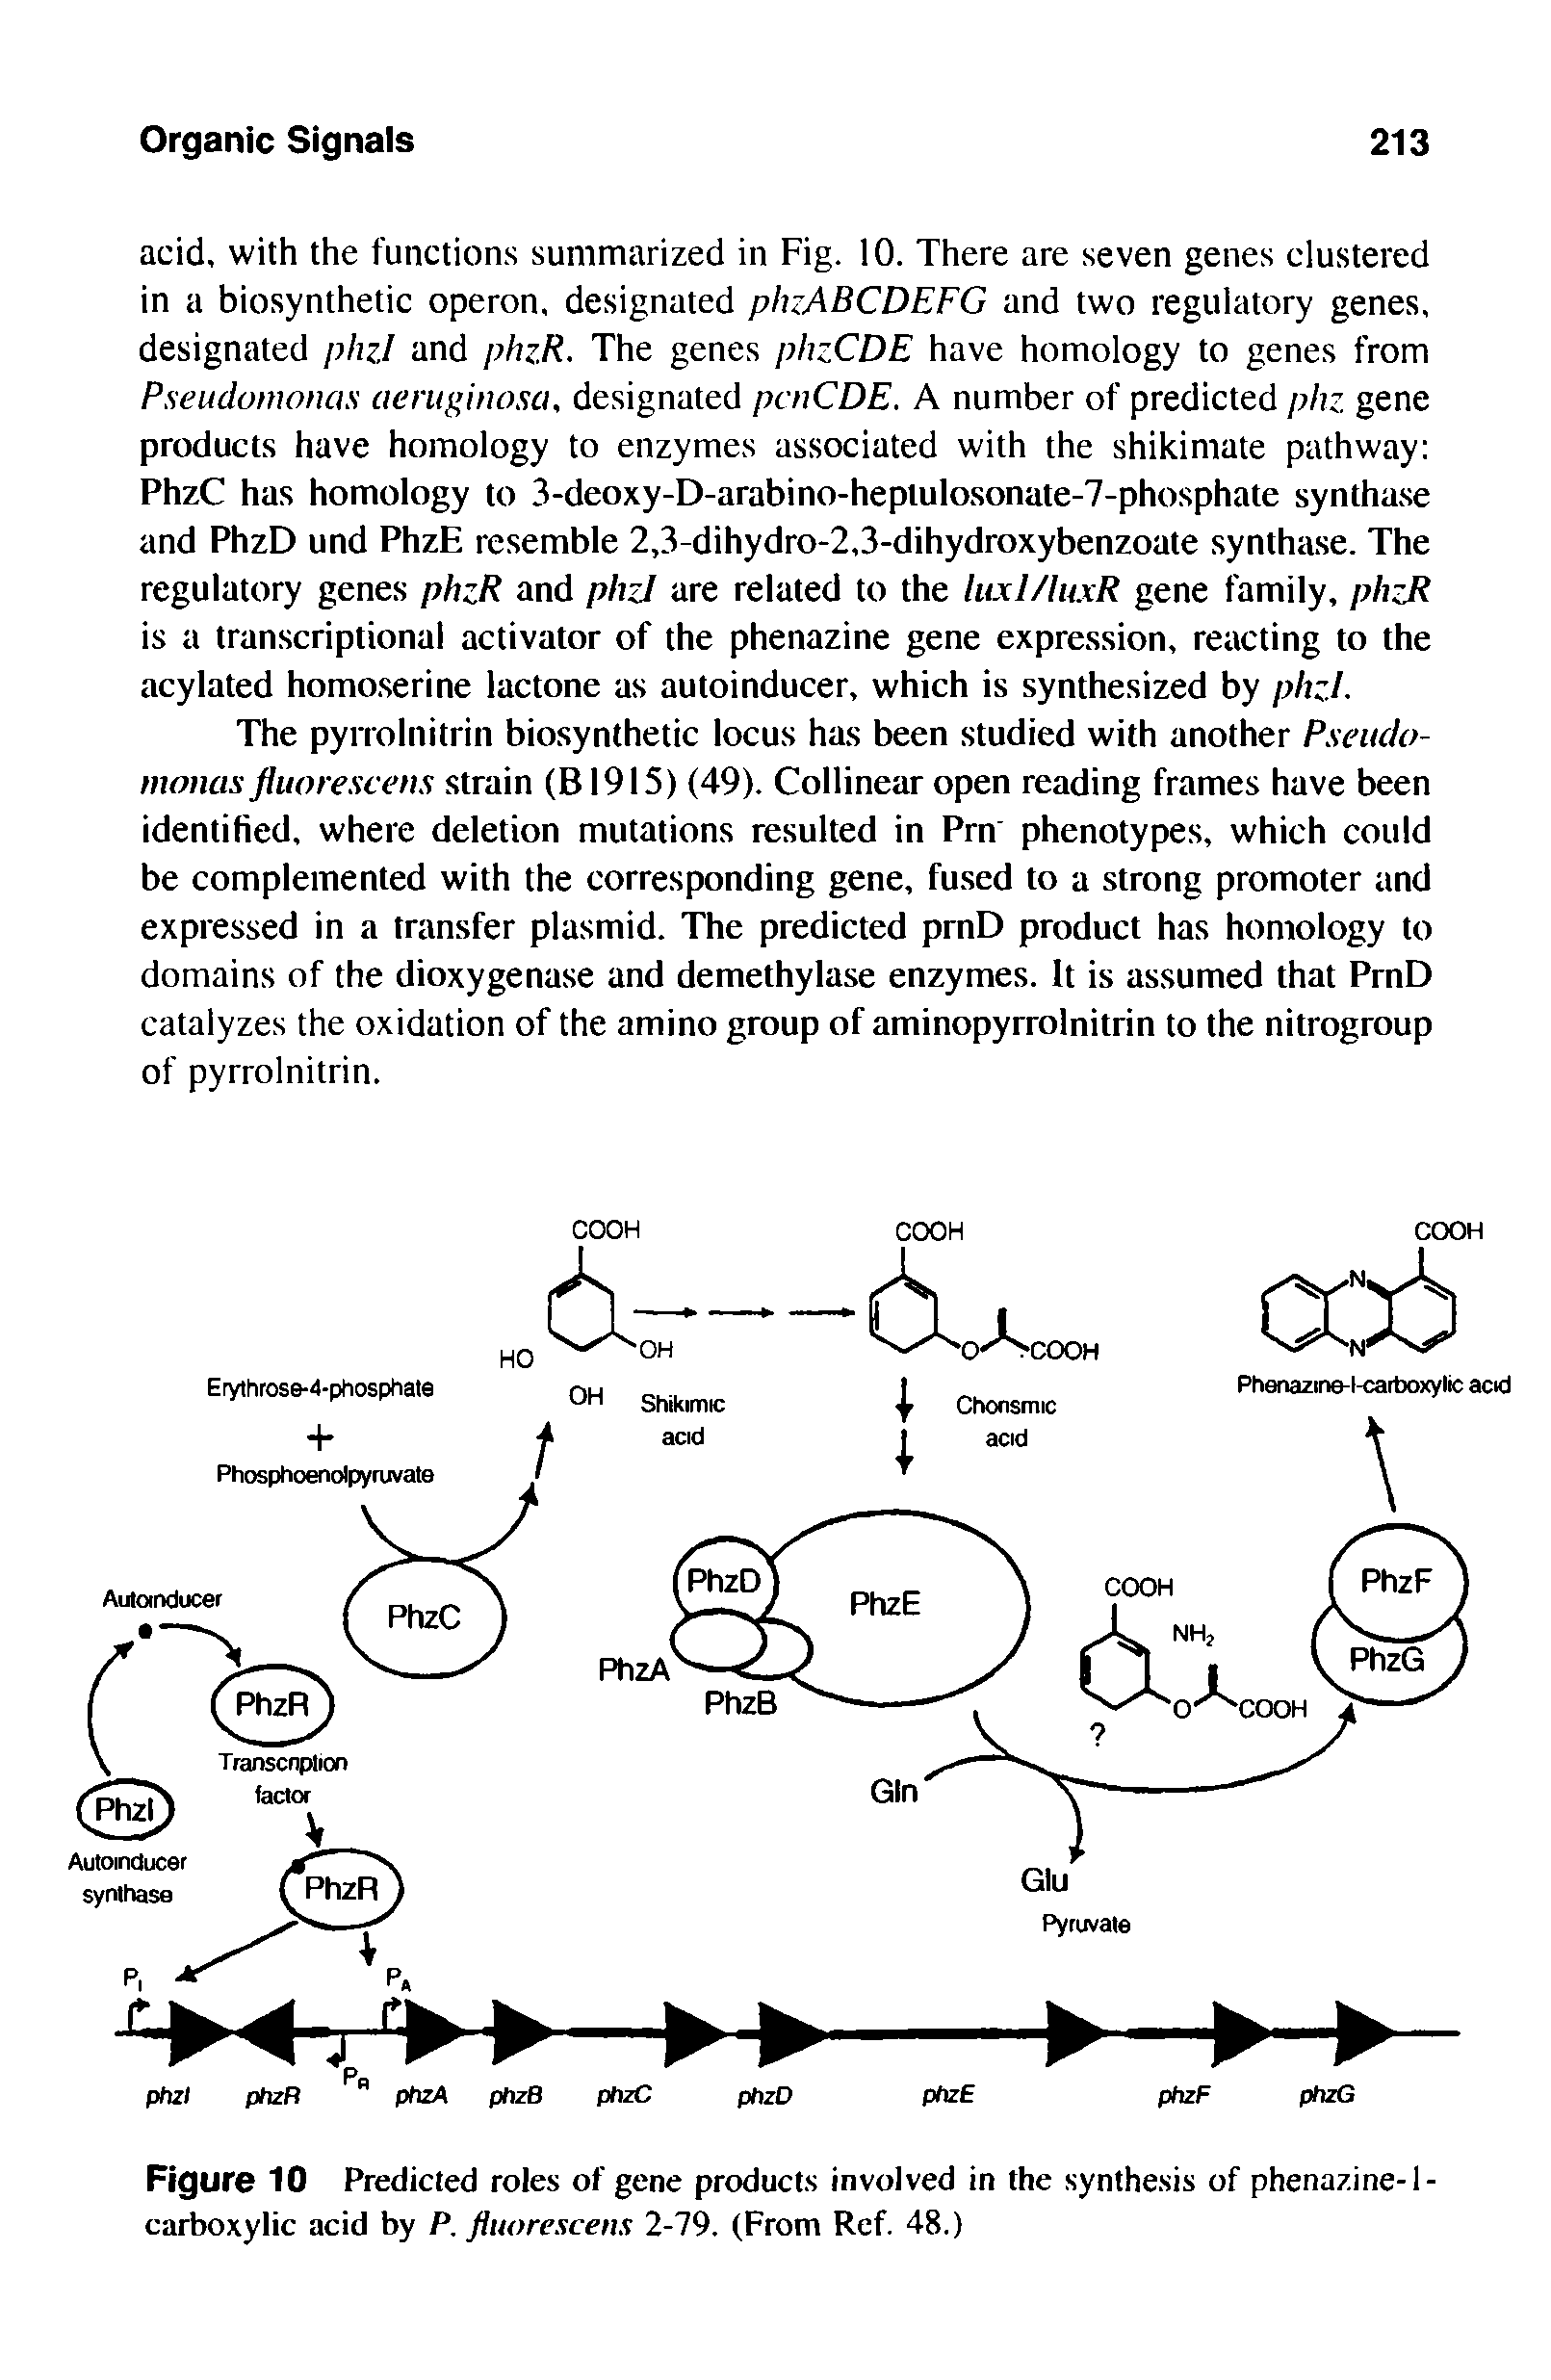 Figure 10 Predicted roles of gene products involved in the synthesis of phenazine-1-carboxylic acid by P. jluorescens 2-79. (From Ref. 48.)...